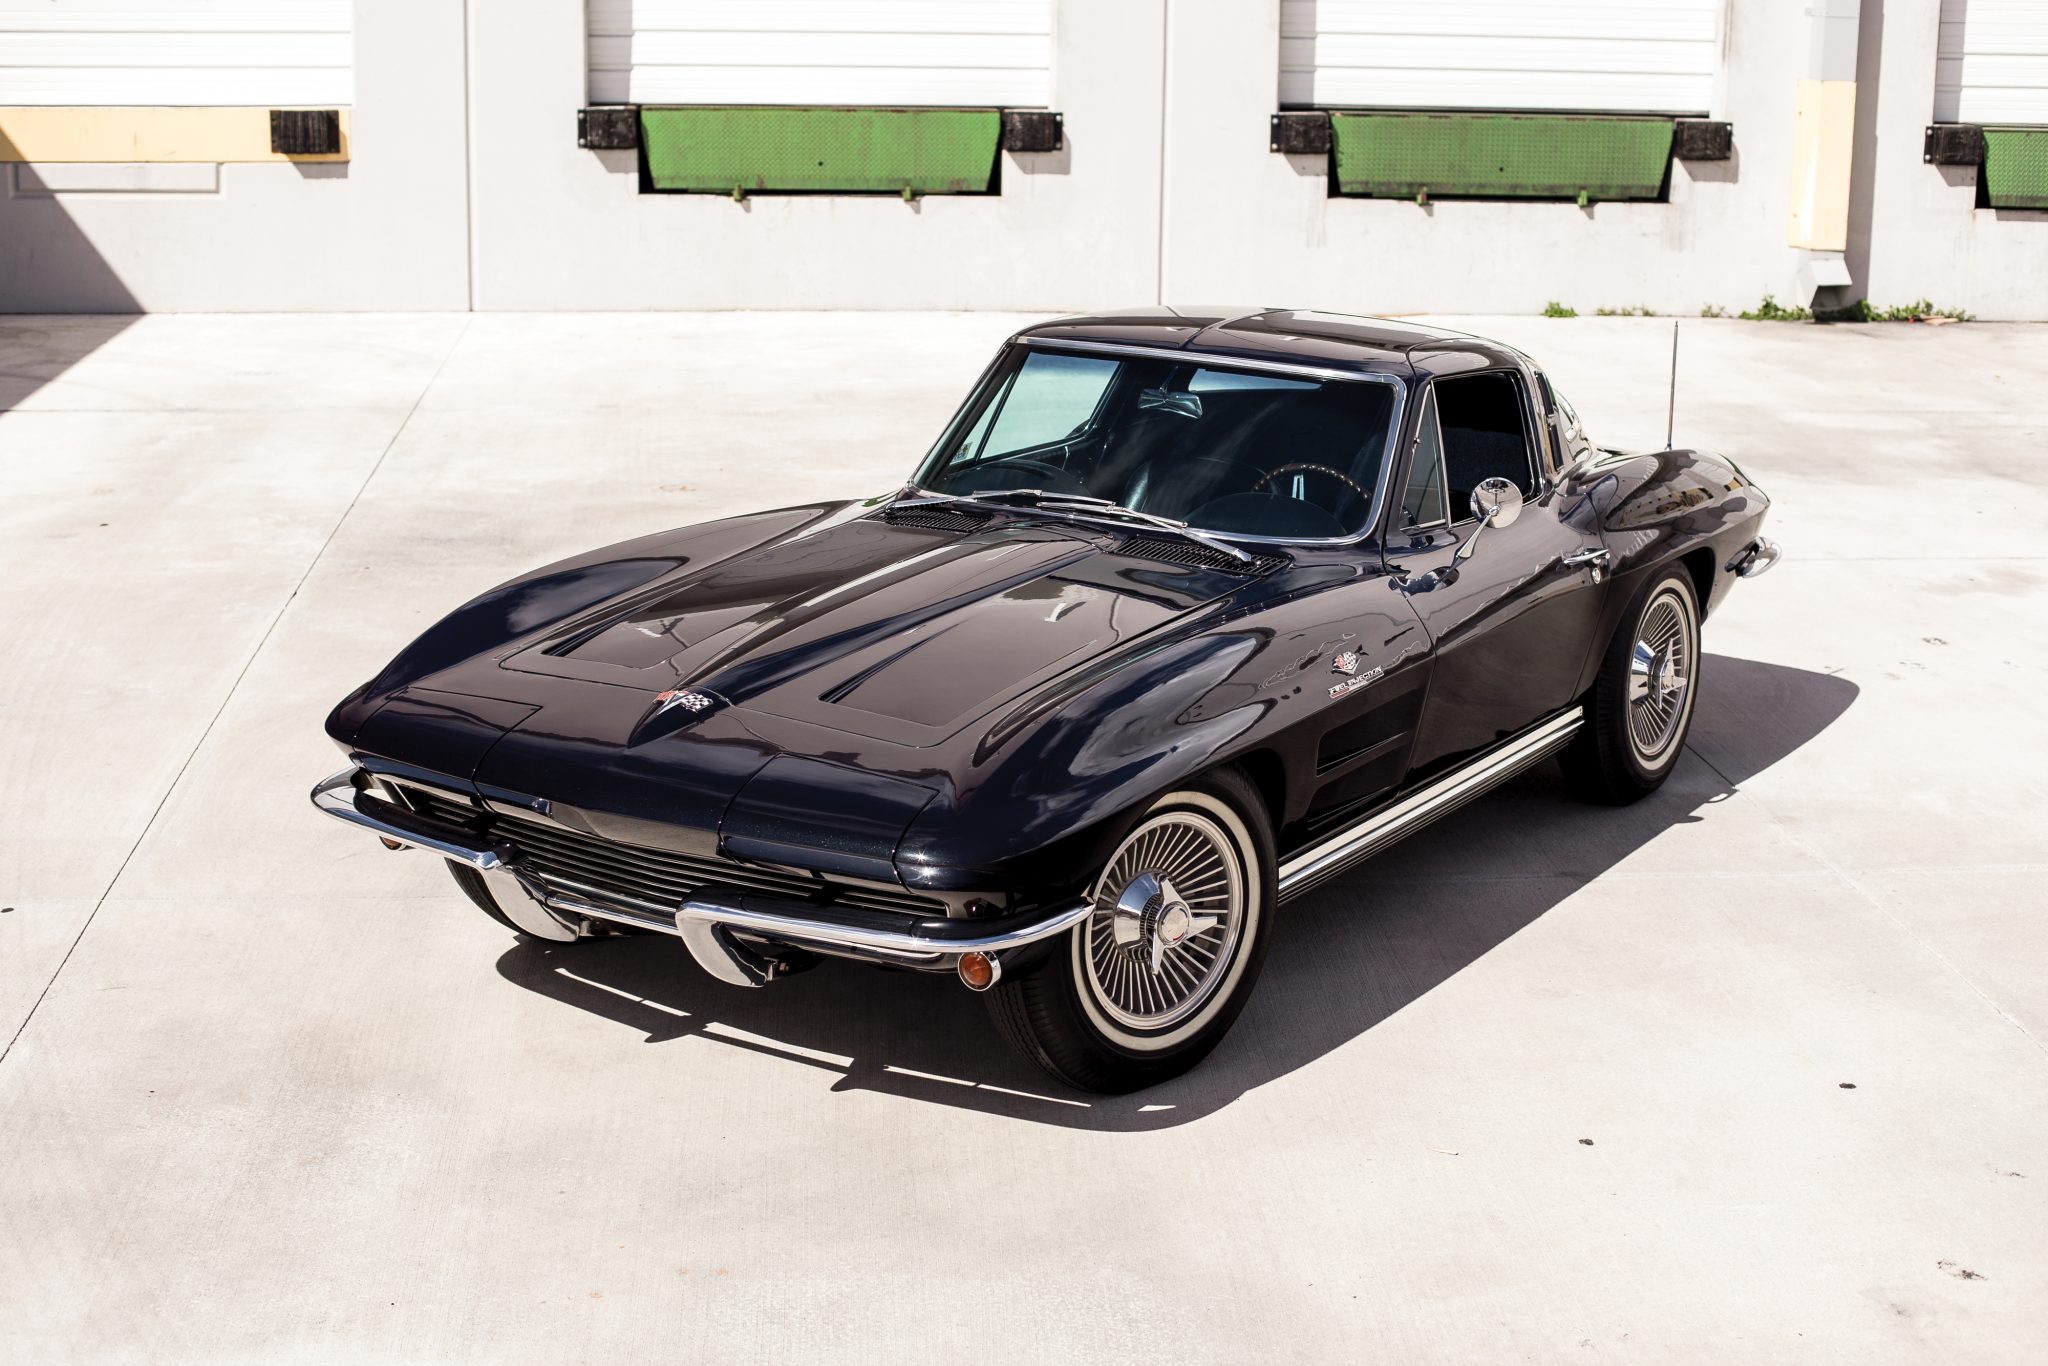 1964 Chevrolet Corvette Sting Ray Fuel Injected Coupe 20 2048x1366 1